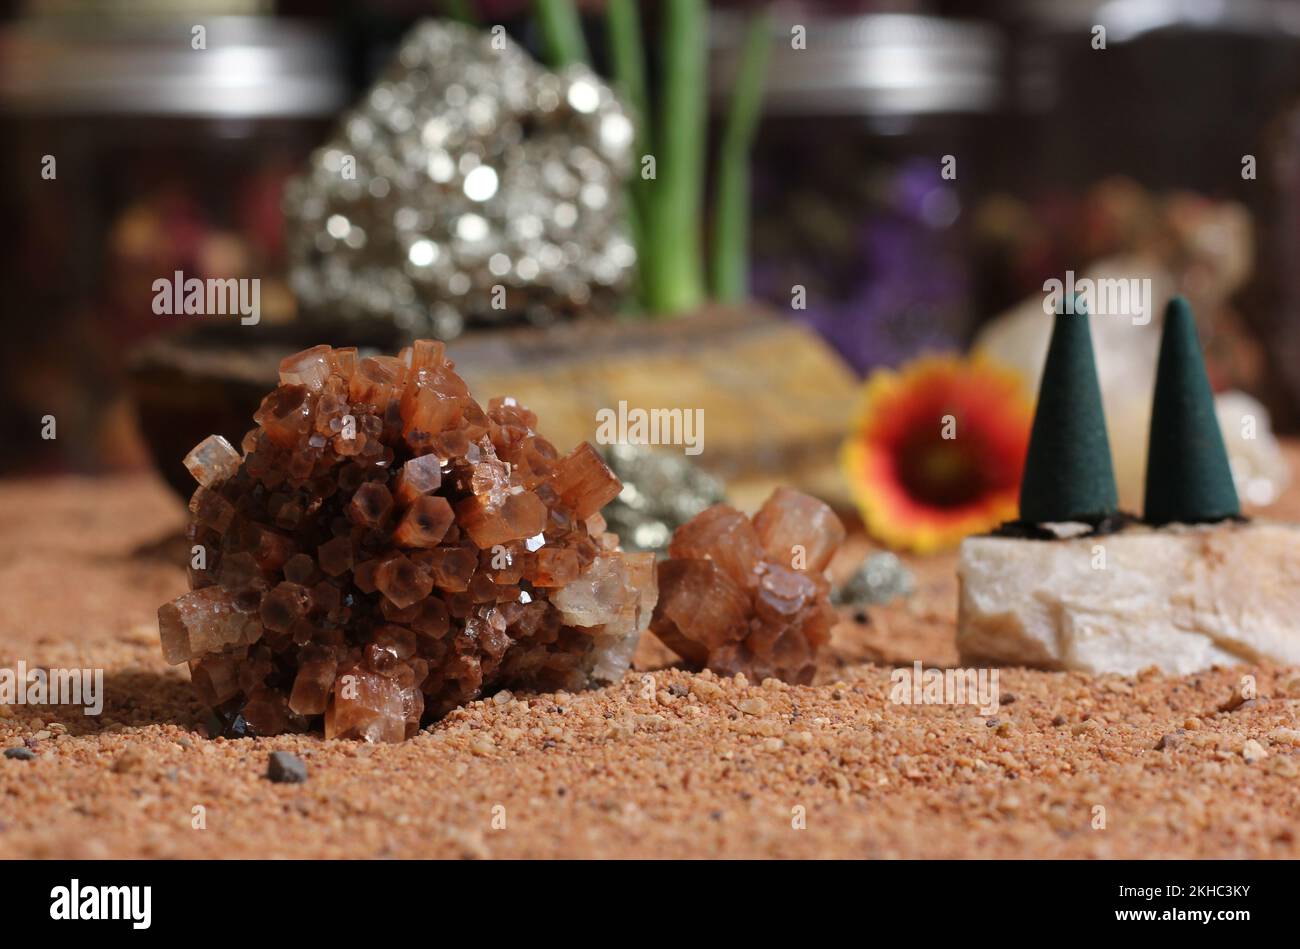 Chakra Stones With Aloe Vera Plants and Incense Cones on Australian Red Sand Stock Photo